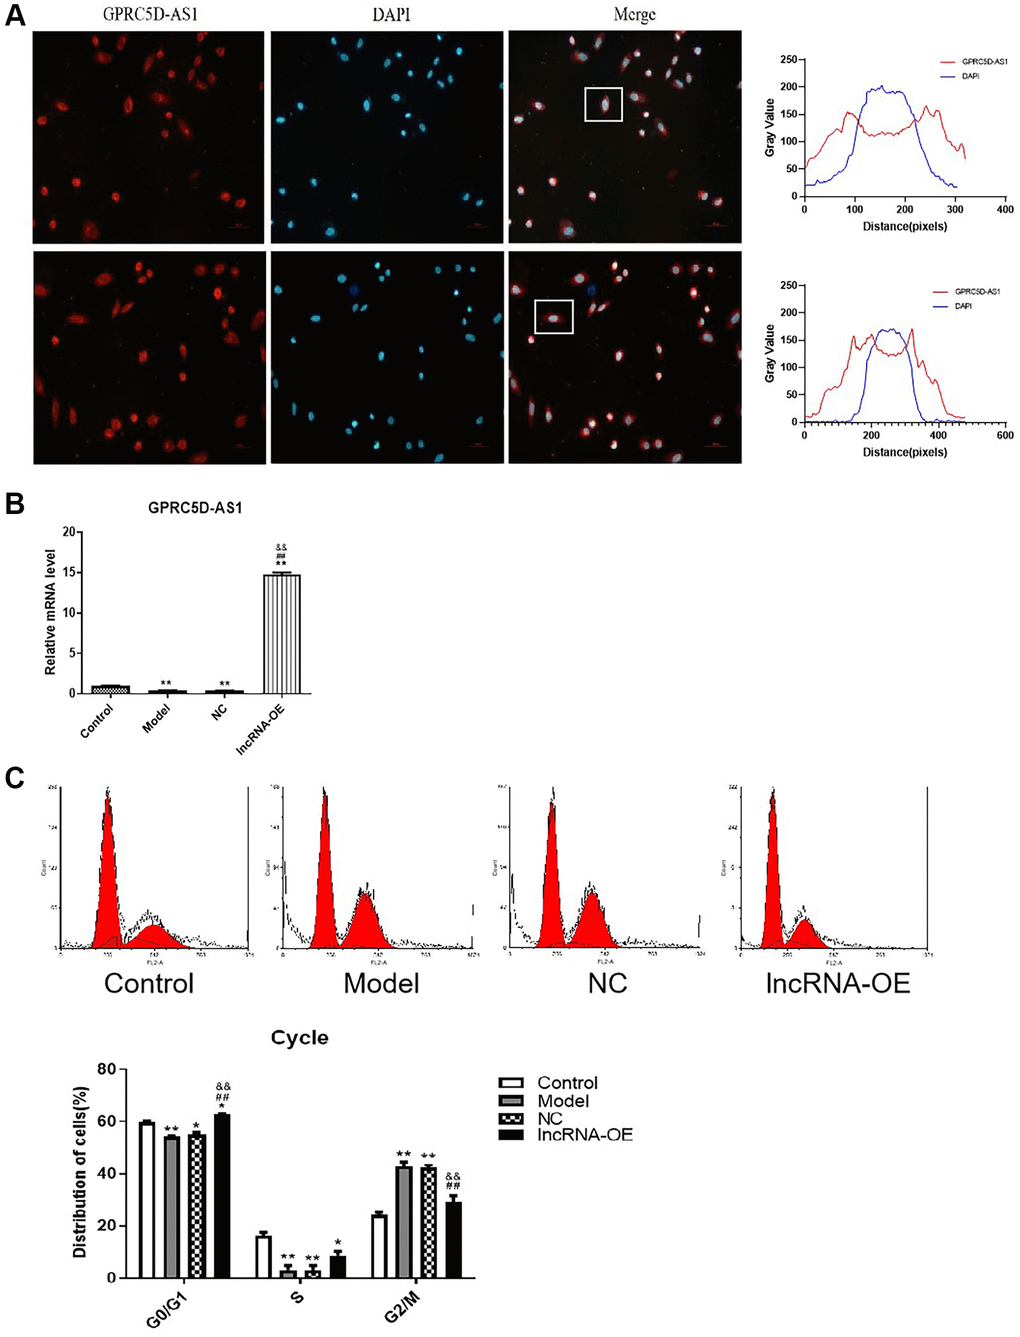 GPRC5D-AS1 restored the proliferation level of atrophic myoblasts. (A) FISH assay was utilized to identify the subcellular localization of long non-coding RNA (lncRNA) GPRC5D-AS1 in cells (200 ×). The red fluorescence represents GPRC5D-AS1, and the blue fluorescence represents the cell nucleus. Quantification of fluorescence intensities (Gray Value) by ImageJ software. (B) The efficiency of overexpression vector encoding GPRC5D-AS1 was examined by qRT-PCR. Human skeletal muscle myoblasts (HSMM) were the control group. 15 mM Dexamethasone (Dex) was added in HSMM to establish atrophy cell model (model group). Empty plasmid (NC group) and GPRC5D-AS1-OE plasmid (lncRNA-OE group) were transfected into atrophy cell model. Differences among groups were analyzed using ANOVA with Bonferroni’s multiple comparison test. *P **P #P ##P &P &&P C) Effects of GPRC5D-AS1 overexpression on cell cycle progression using flow cytometry after propidium iodide staining. Representative images were shown. *P **P #P ##P &P &&P 